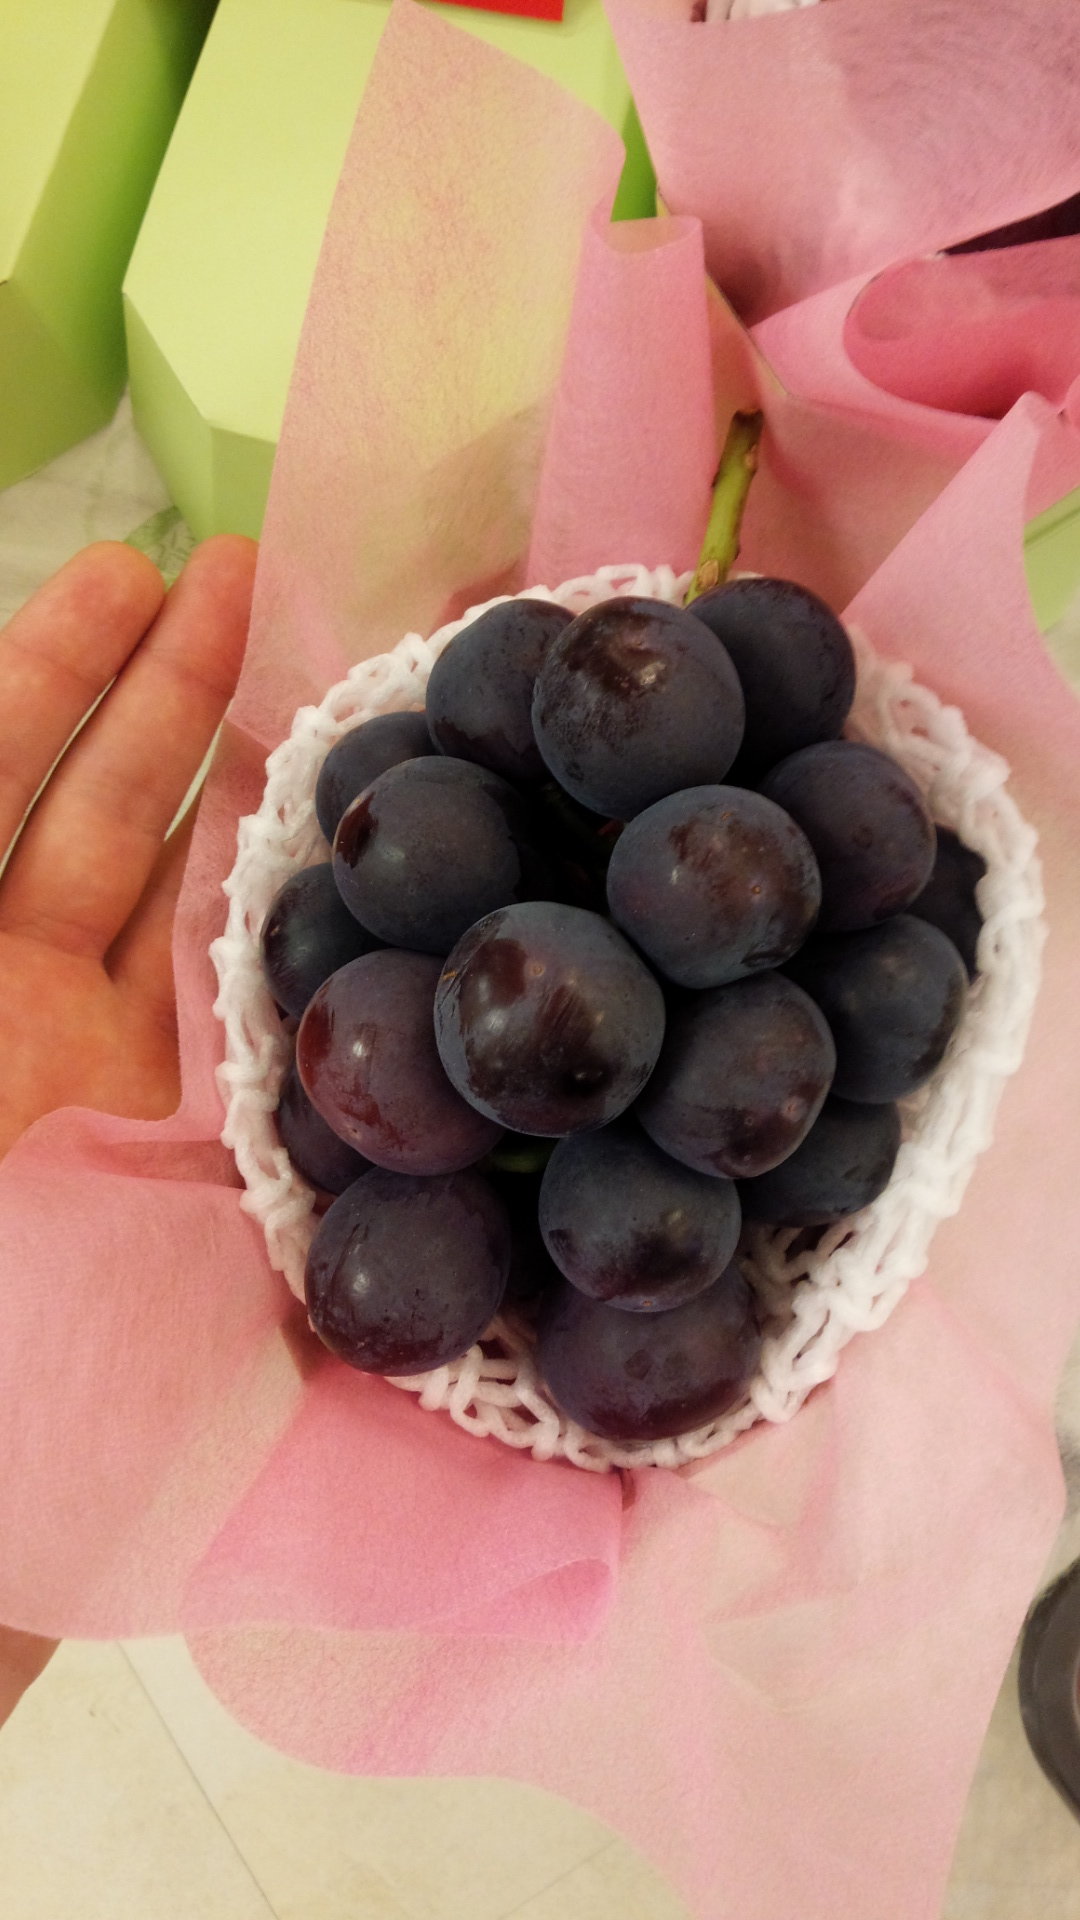 My hands are huge, which means this grape is
freaking huge!